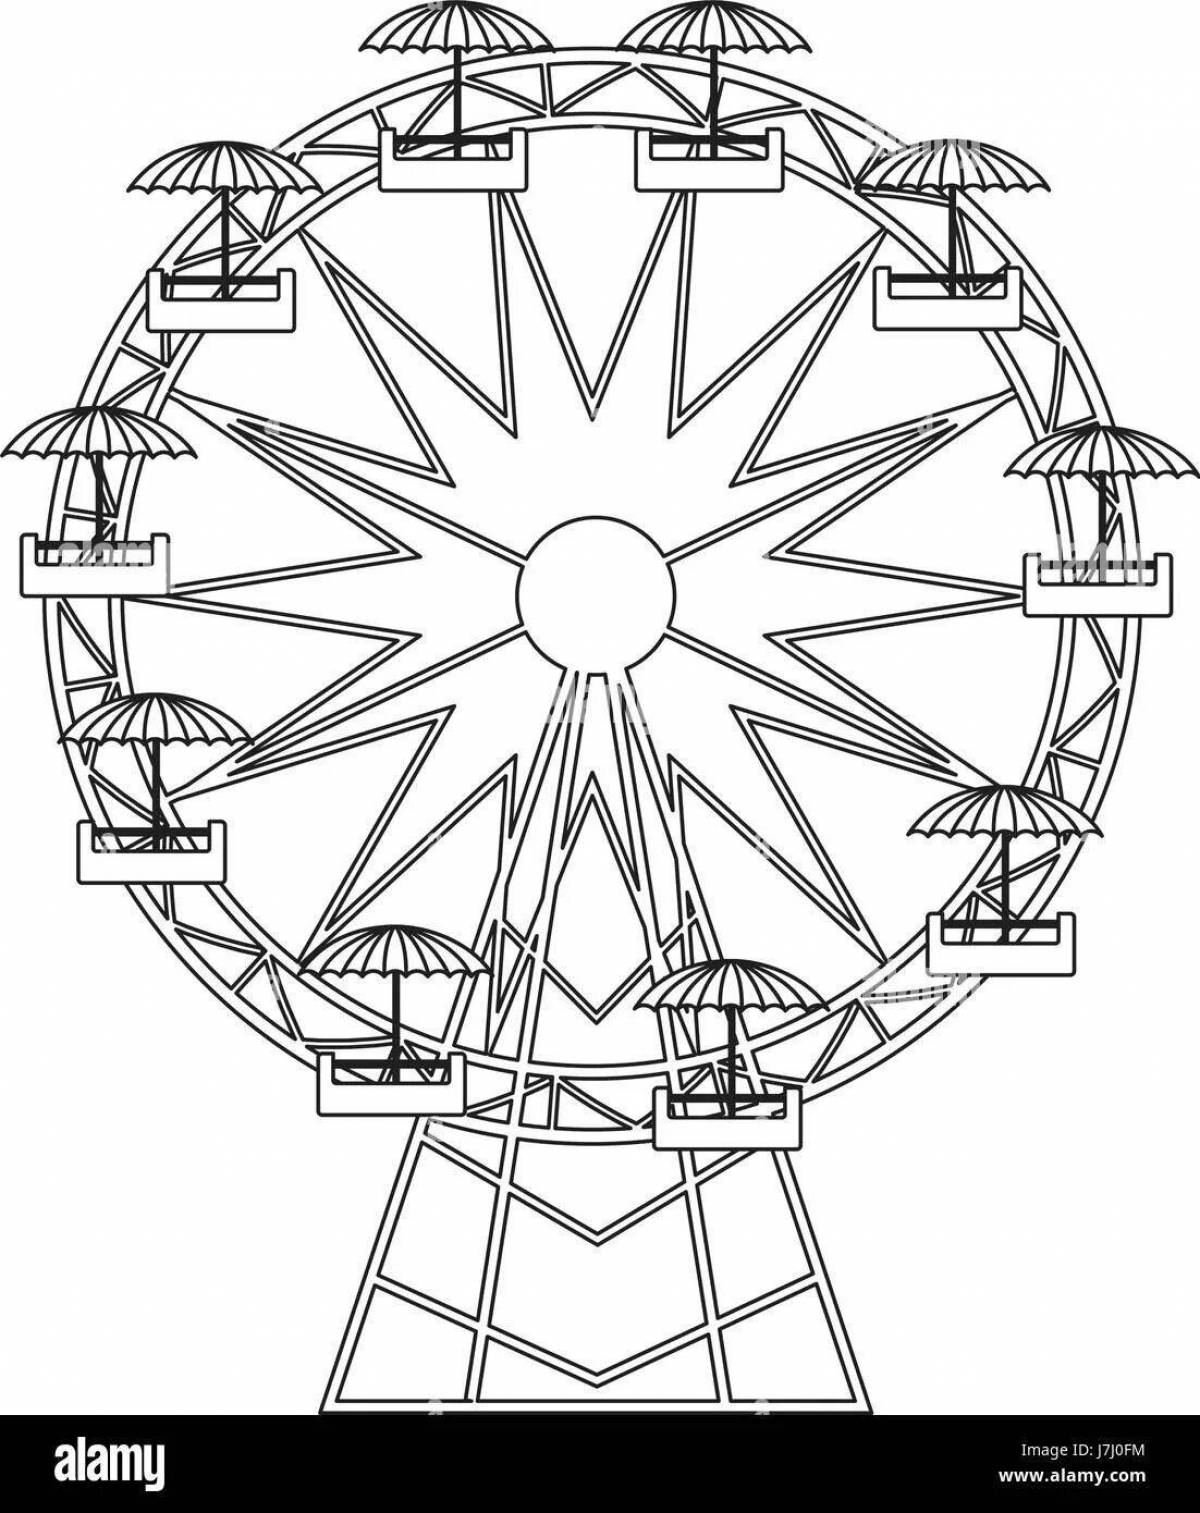 Playful ferris wheel coloring page for kids